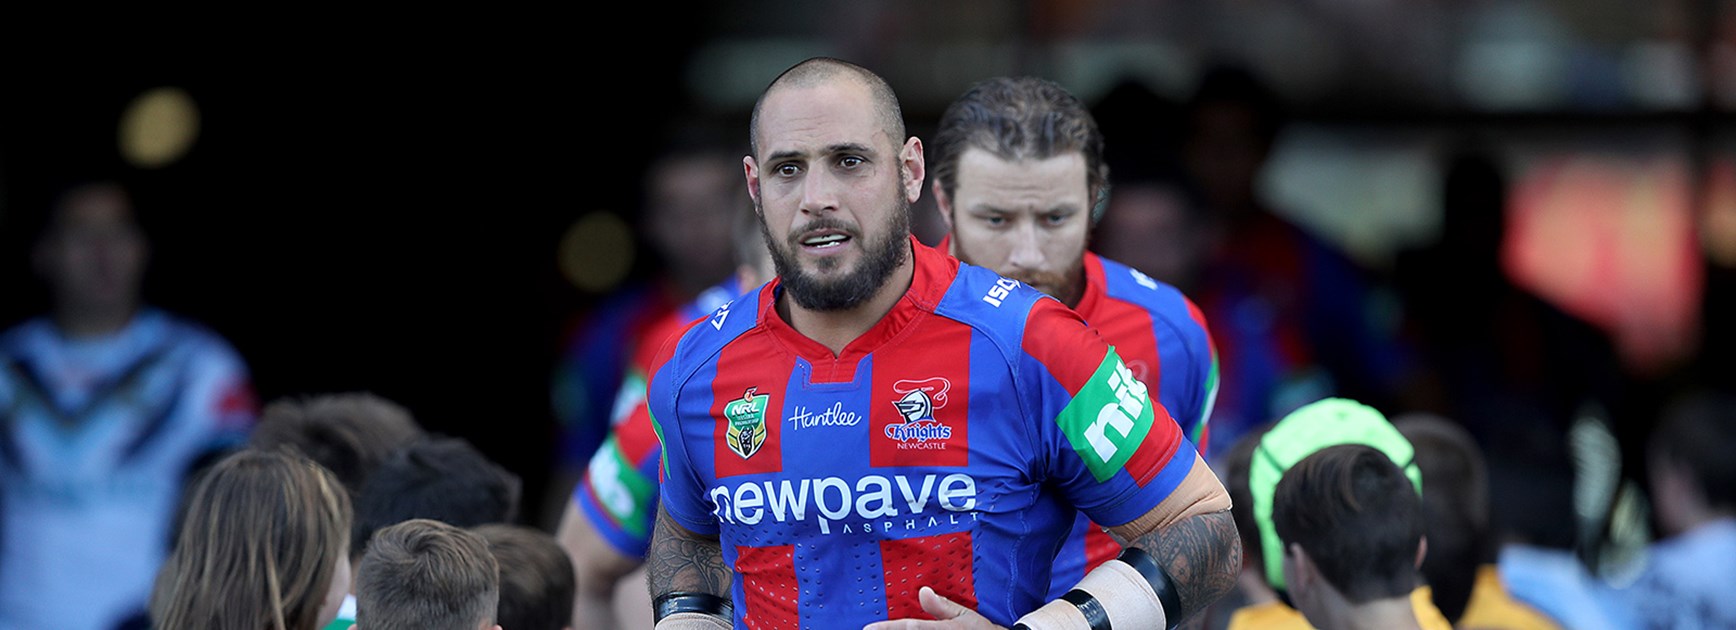 Newcastle Knights veteran Jeremy Smith will retire from rugby league at the end of the 2016 season.